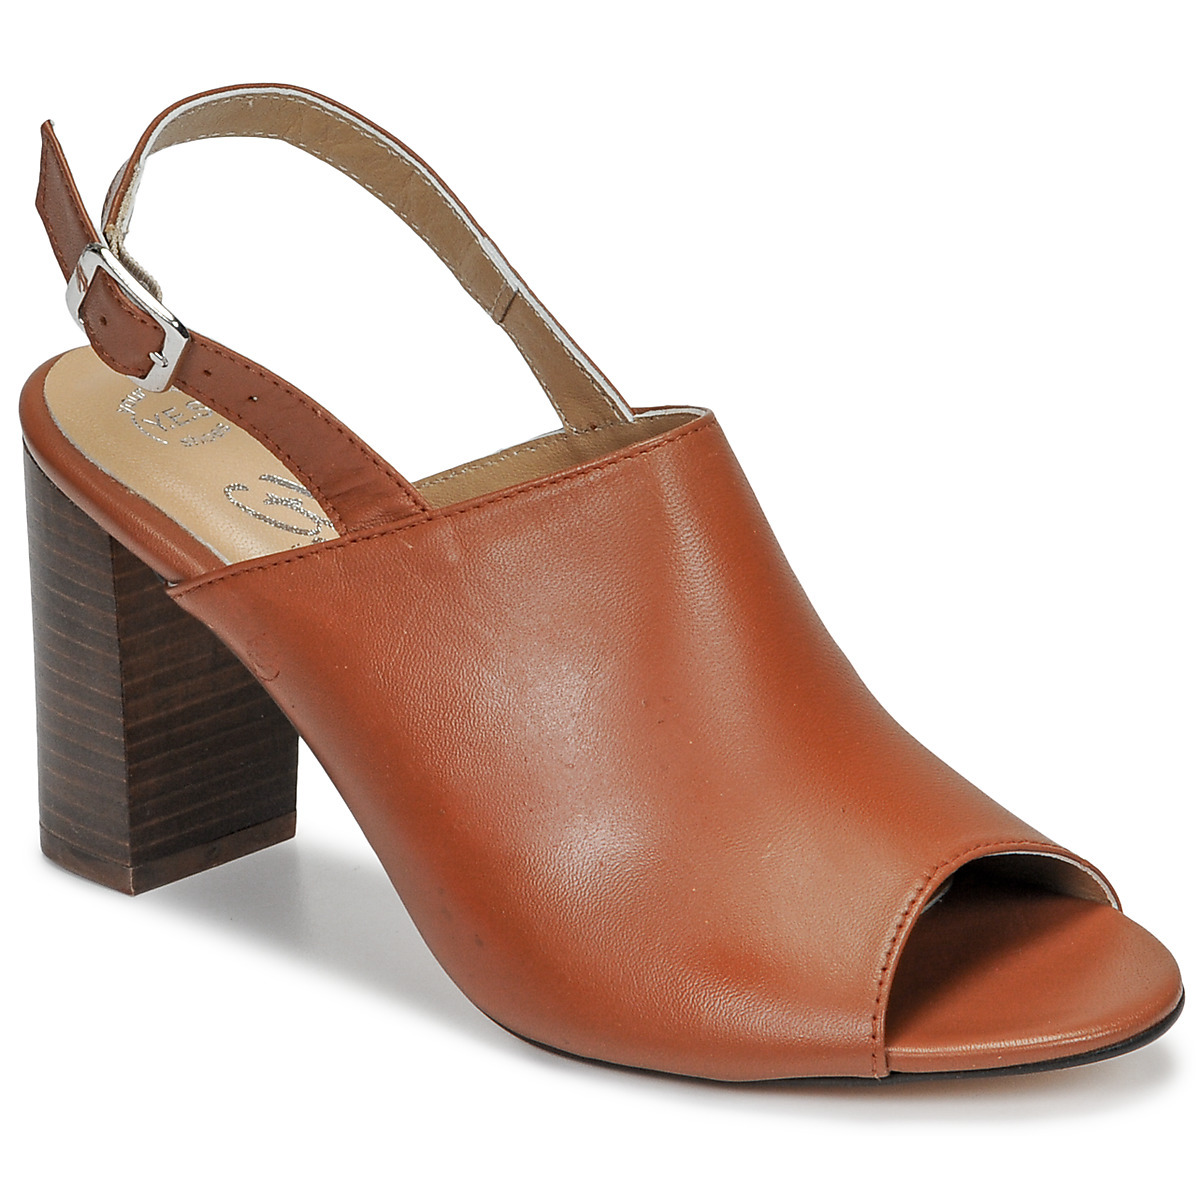 Spartoo Women's Sandals in Brown from Betty London GOOFASH